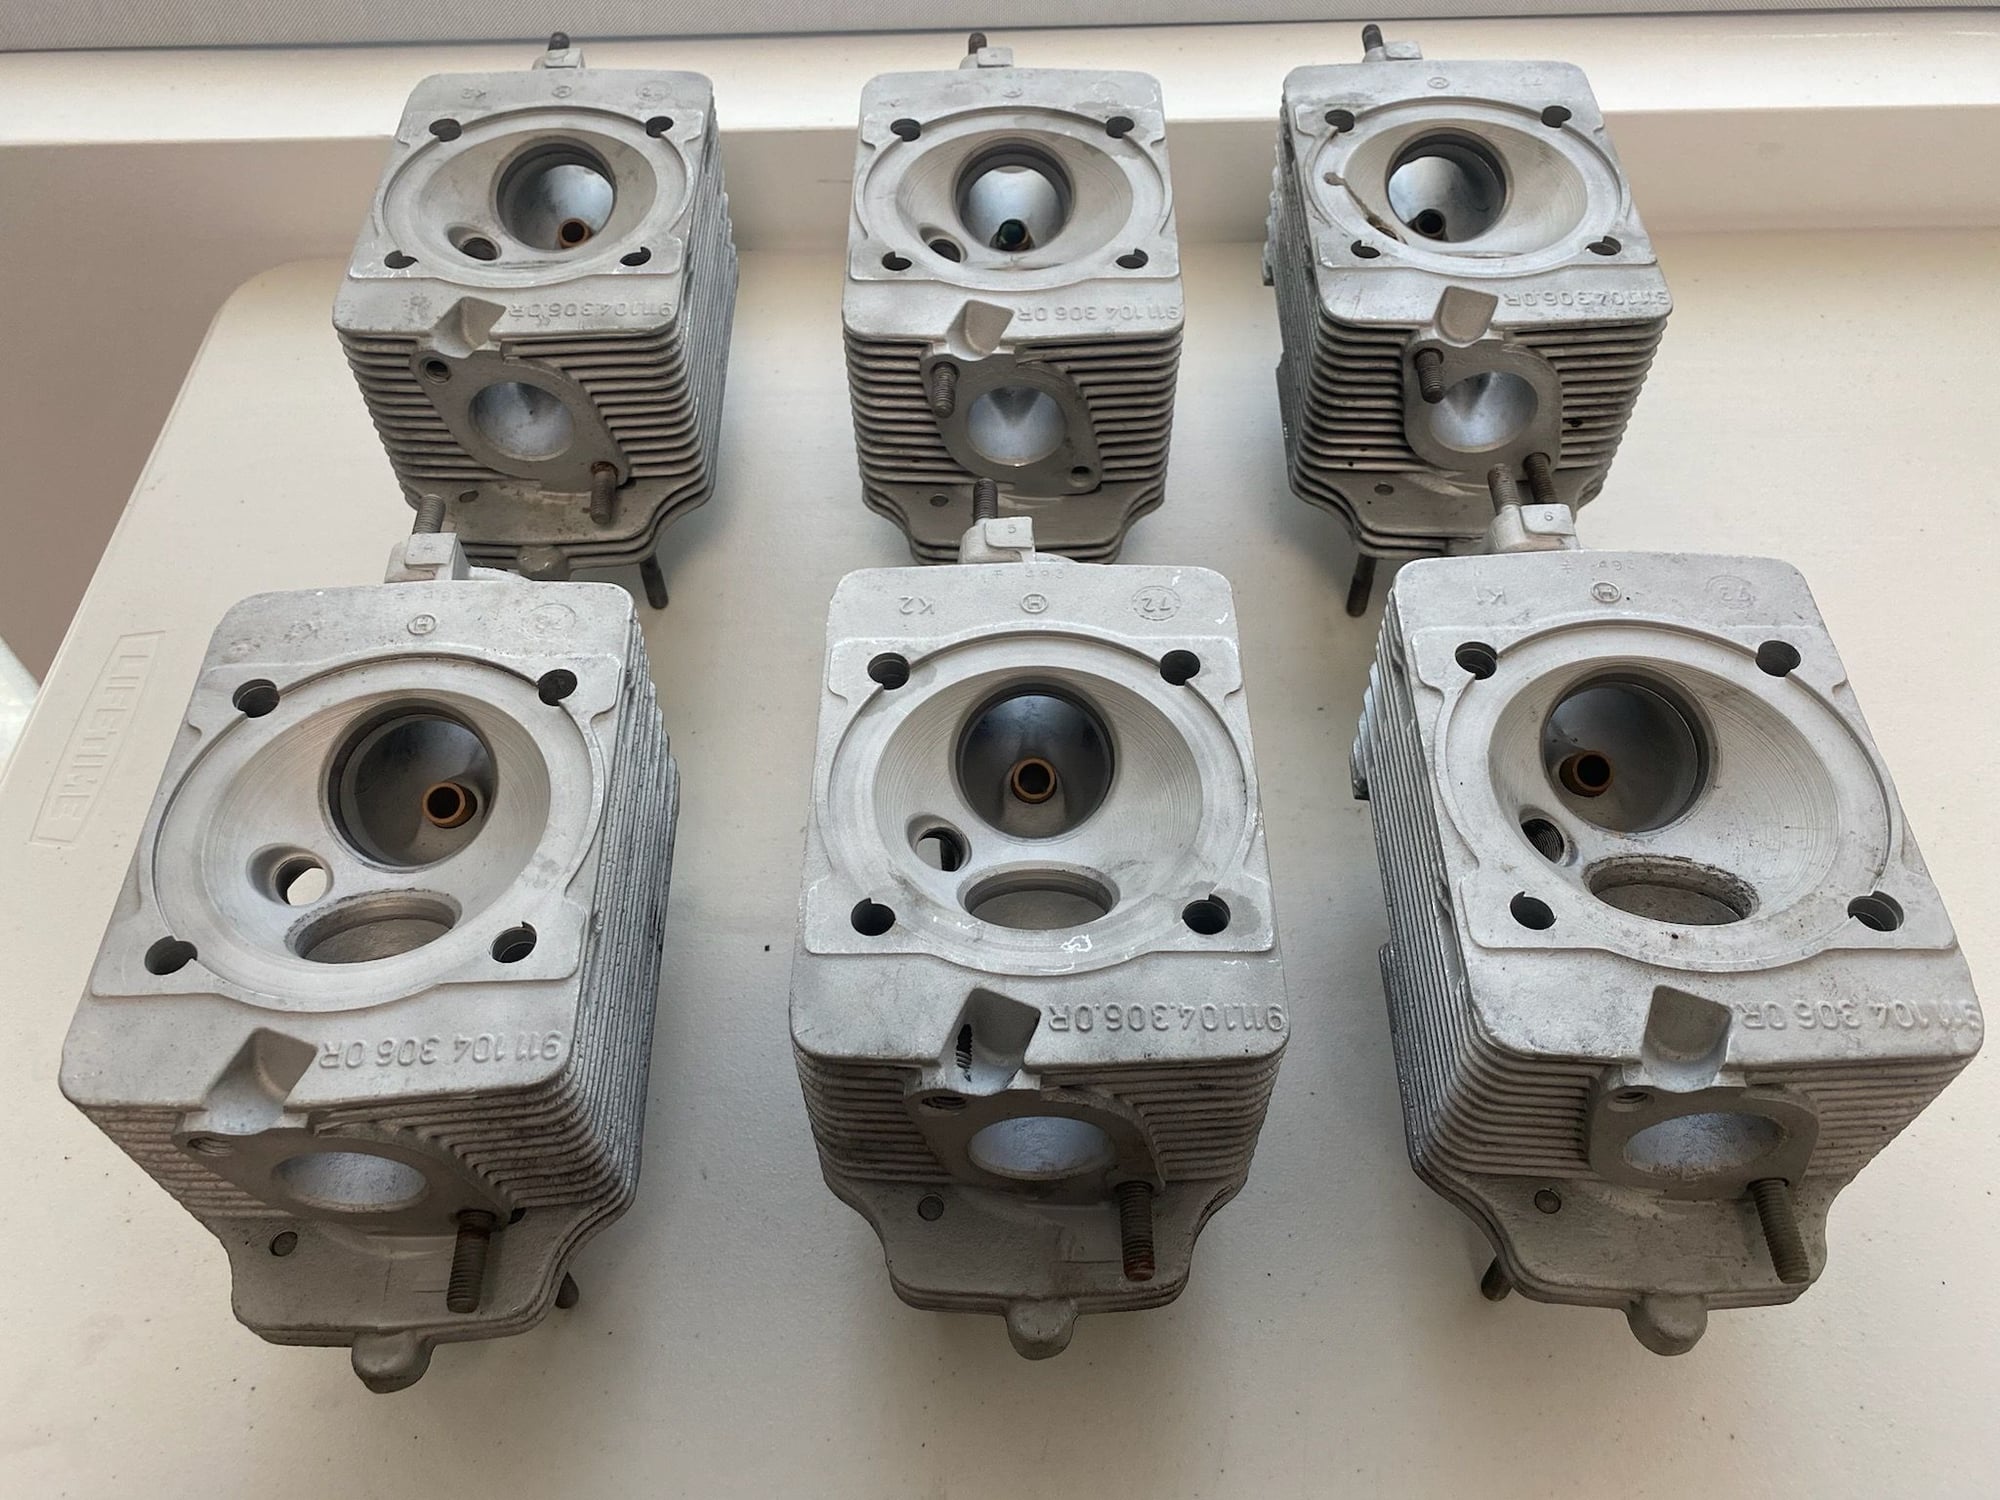 Engine - Internals - Porsche 911 Port-Injected Cylinder Heads 911.104.306.0R set of 6 - Used - 0  All Models - Dallas, TX 75225, United States